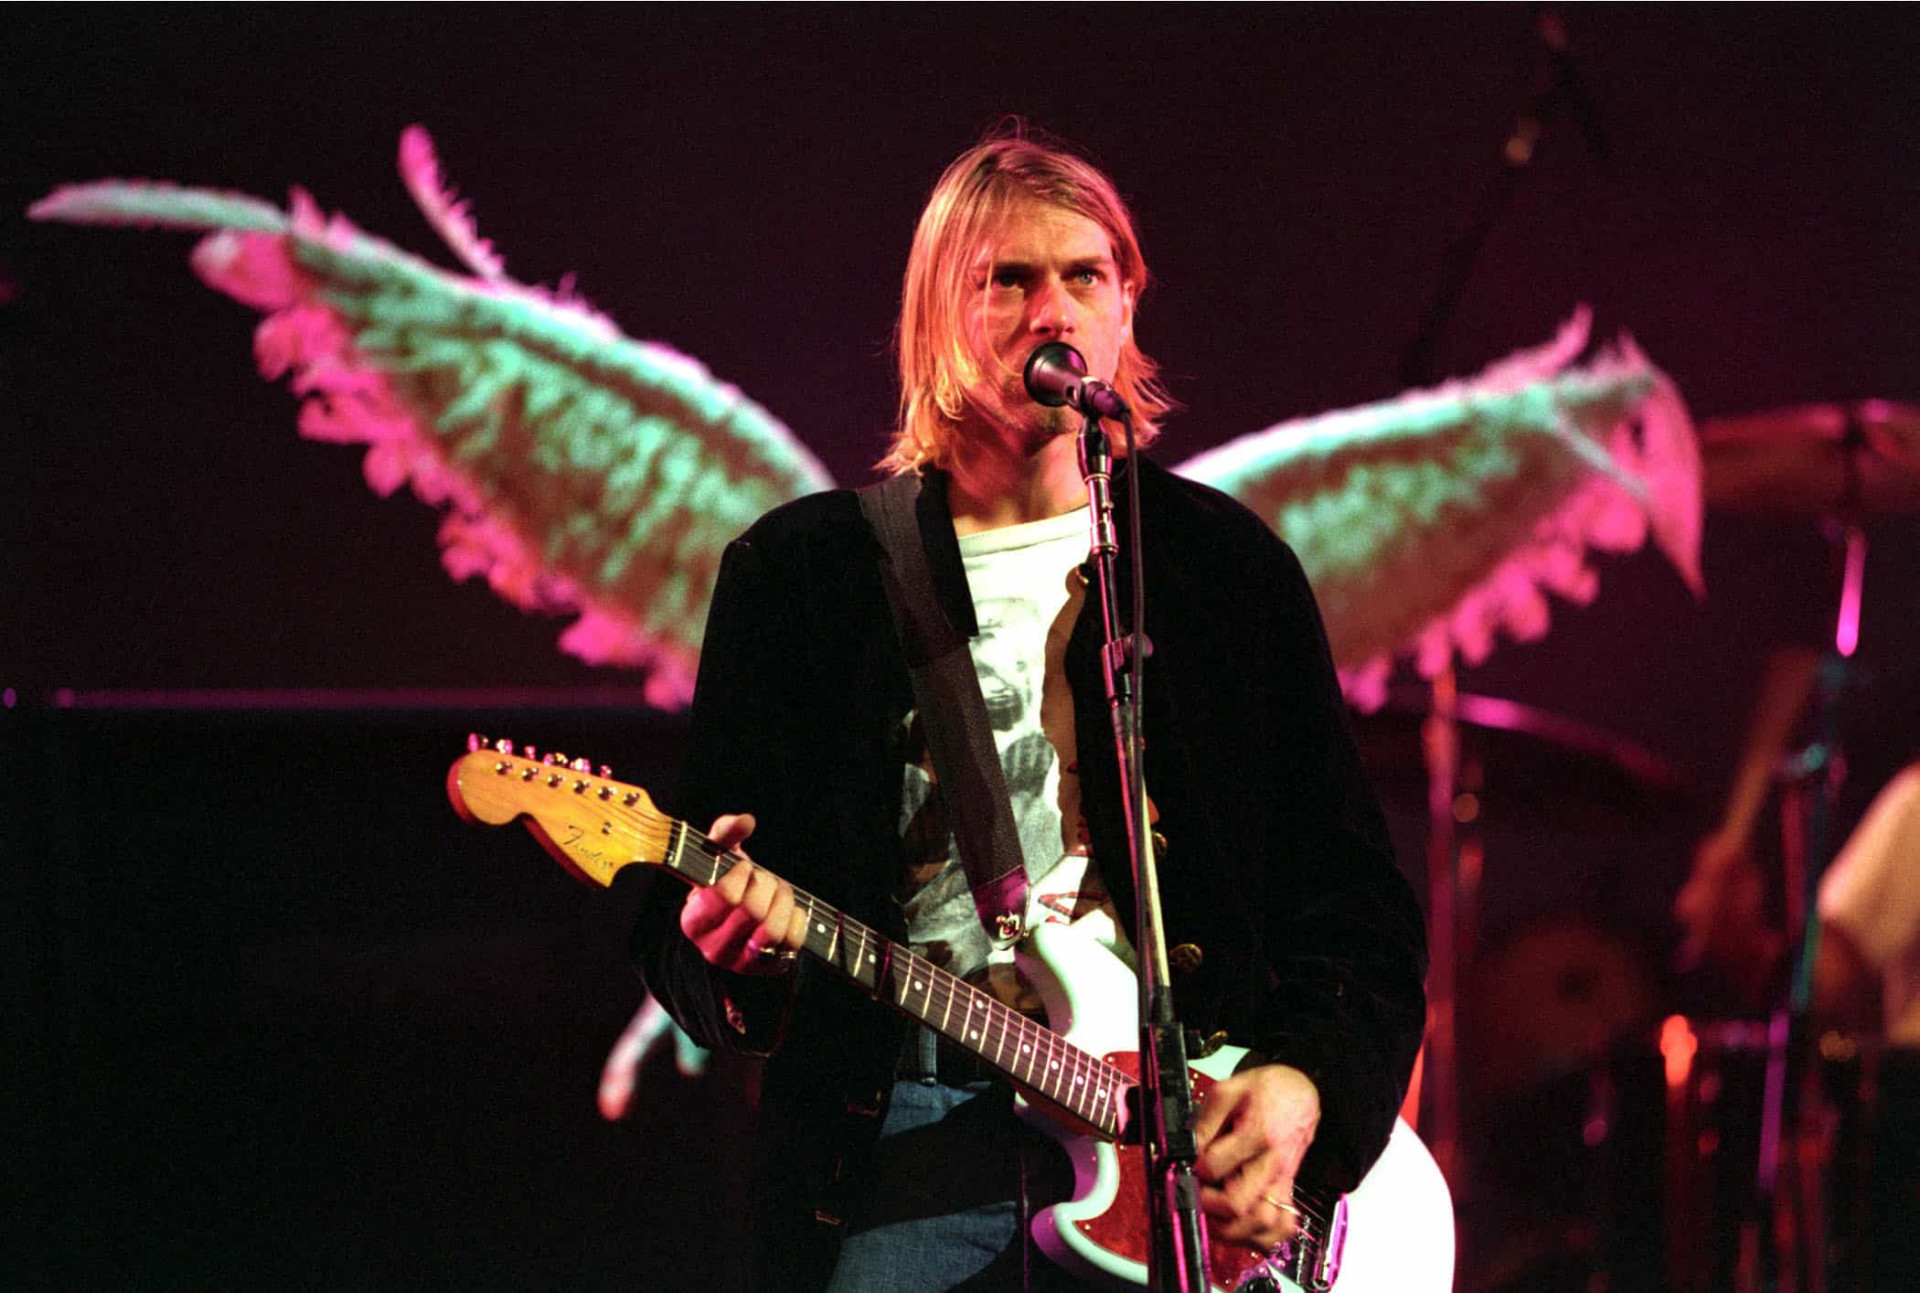 <p>'Very Ape' appears on 'In Utero,' the final Nirvana album before Kurt Cobain took his own life in April 1994.</p><p>You may also like:<a href="https://www.starsinsider.com/n/449213?utm_source=msn.com&utm_medium=display&utm_campaign=referral_description&utm_content=603256en-my"> Memorable opening movie lines</a></p>